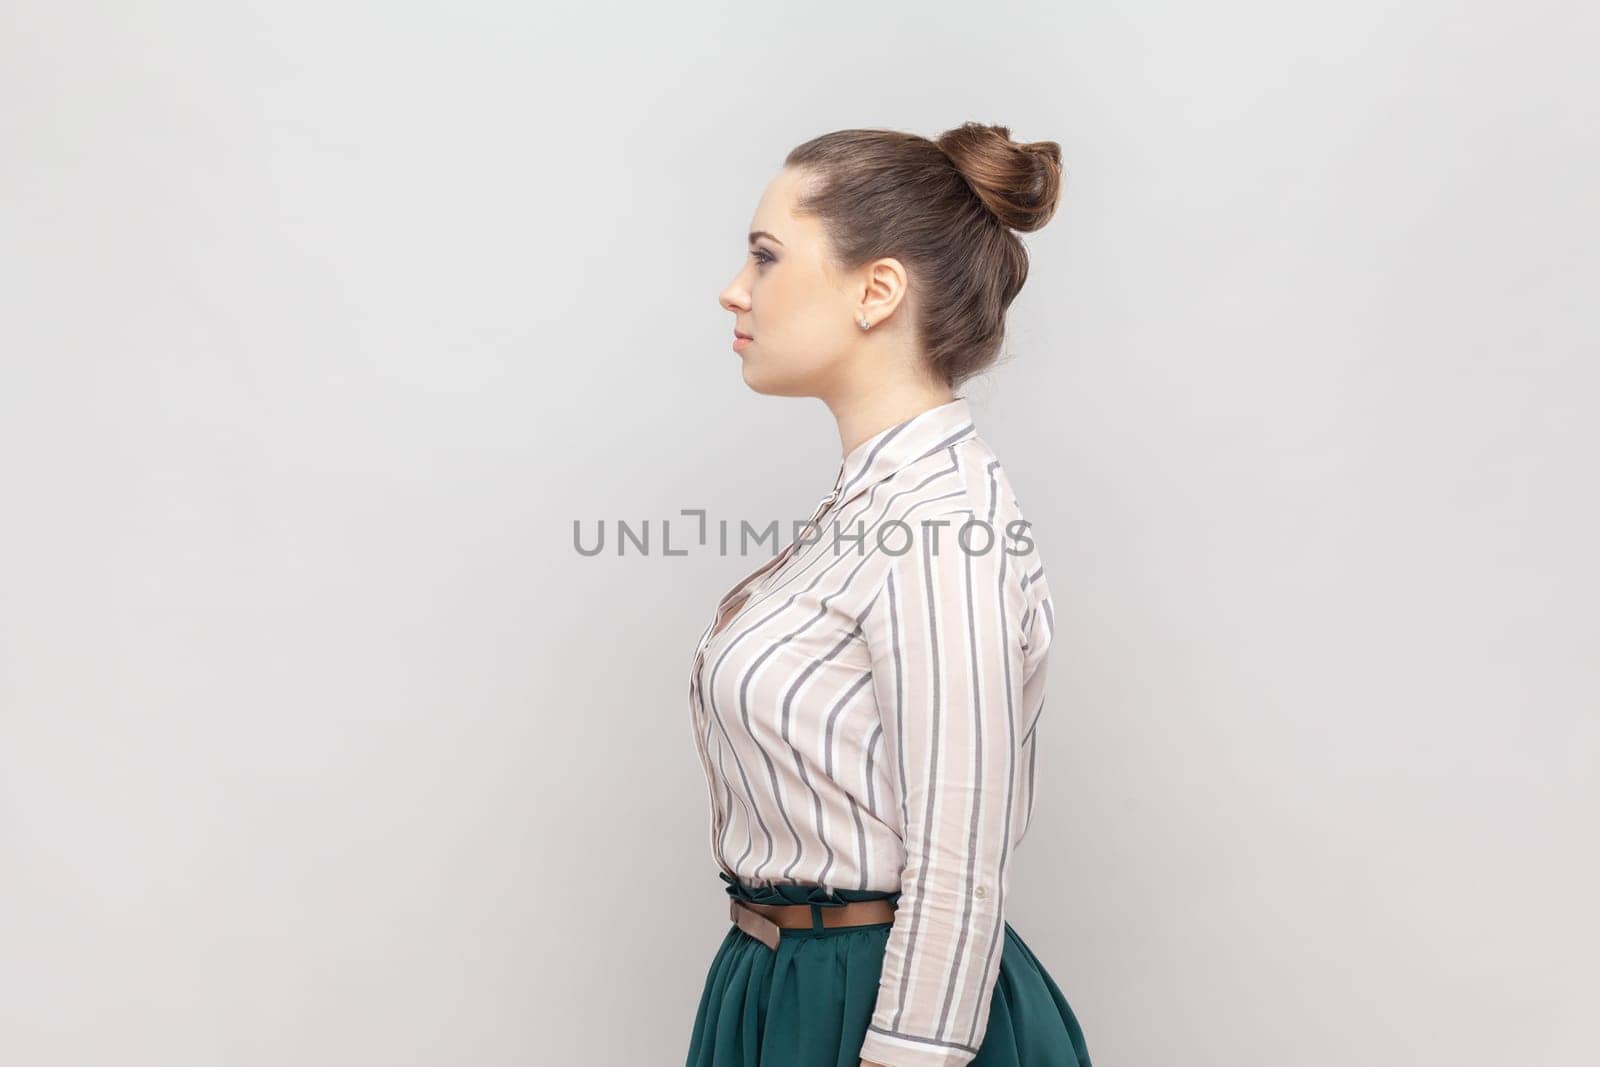 Side view portrait of serious strict woman with bun hairstyle wearing striped shirt and green skirt standing looking ahead, having bossy expression. Indoor studio shot isolated on gray background.